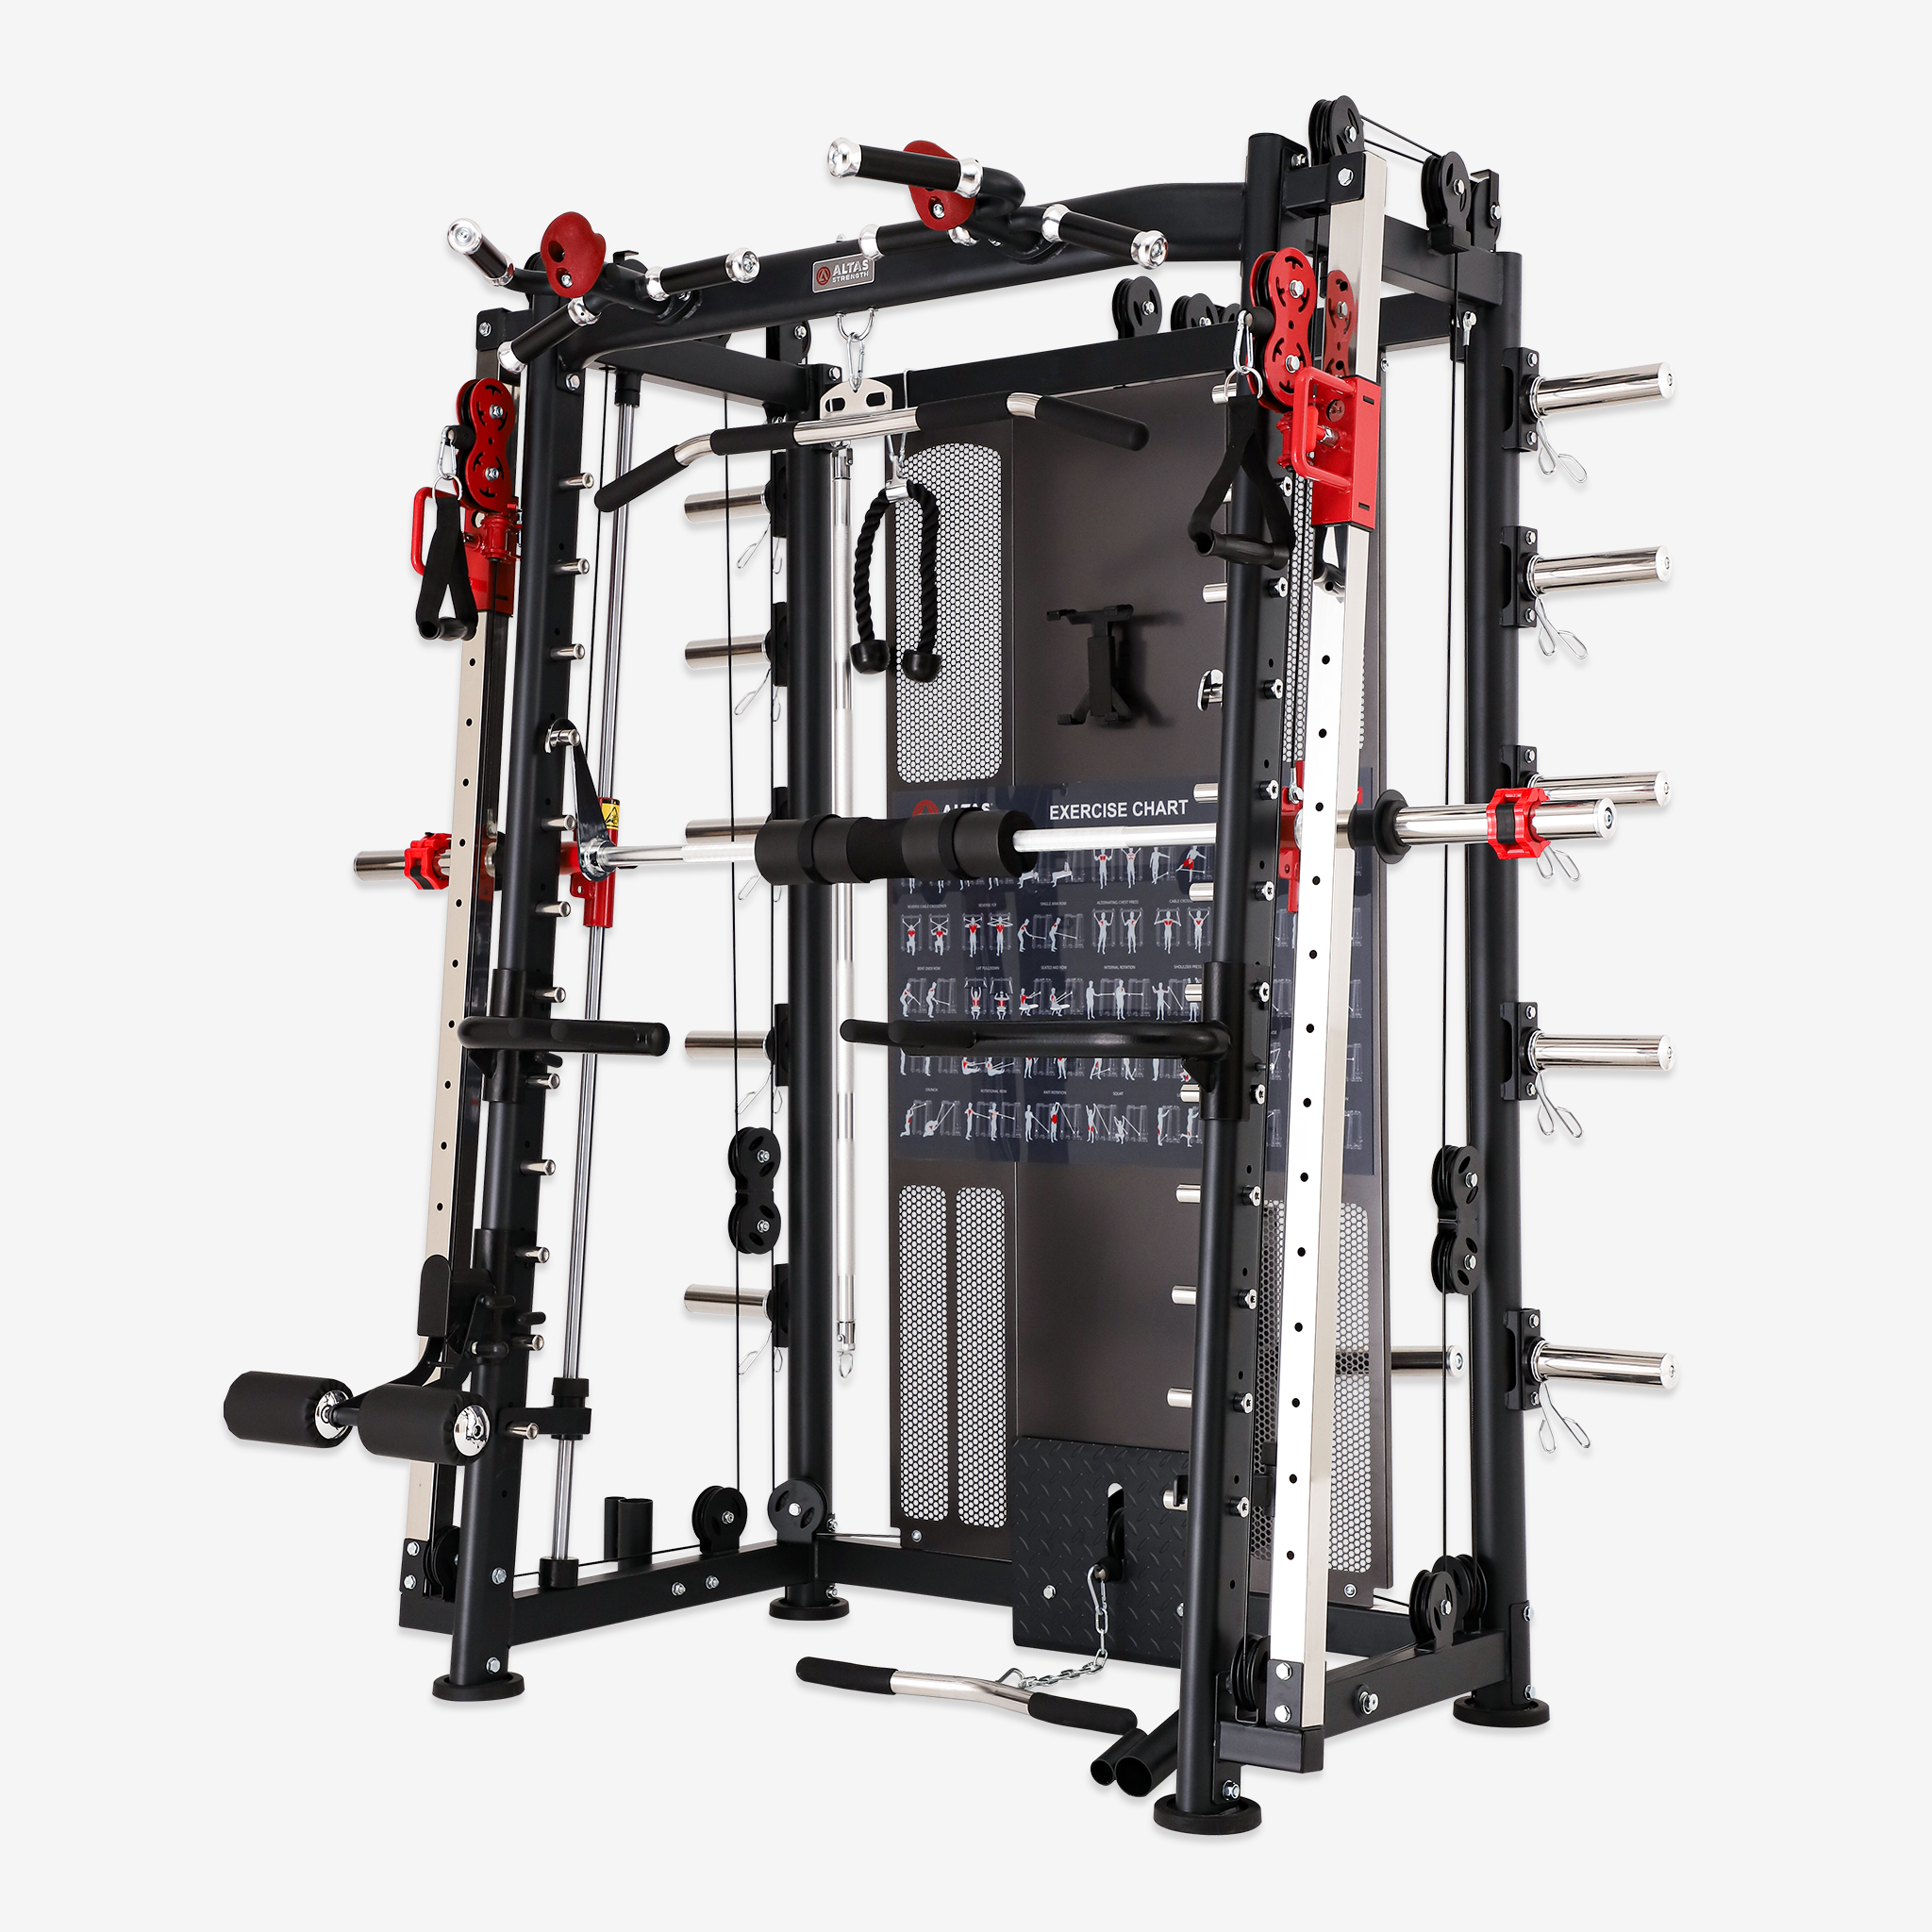 Altas Strength Multi-Function Smith Machine Black And Yellow 2000IB Workout Light Commercial Fitness Equipment AL-3000Y